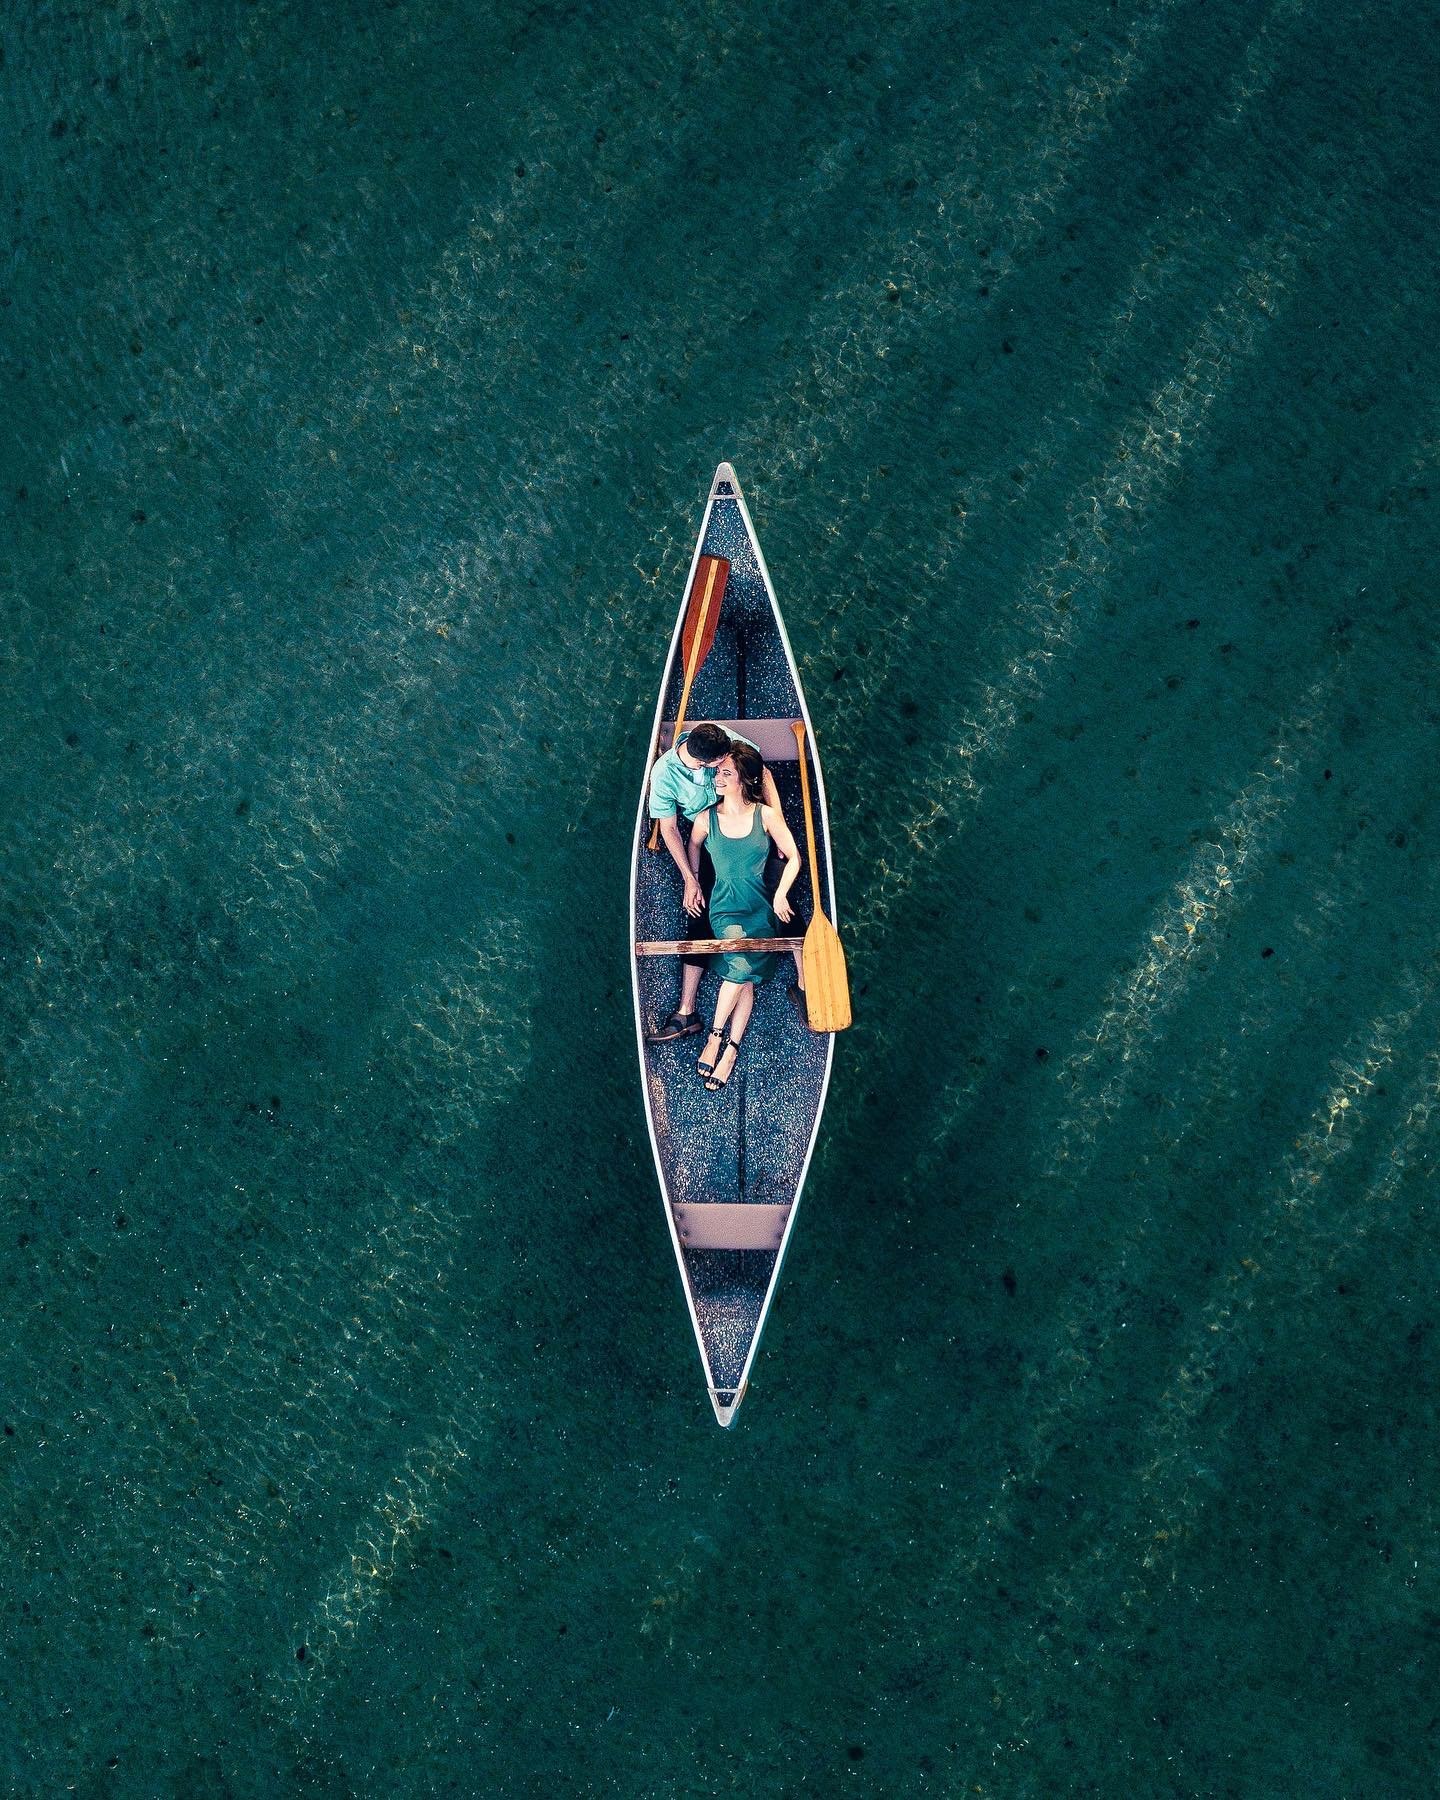 Been a while since I&rsquo;ve taken the drone for a spin! I figured capturing @oliviapileggi and @phil.alekseev in their canoe was the perfect opportunity to get some unique aerial shots. Pretty pleased with the results 😍